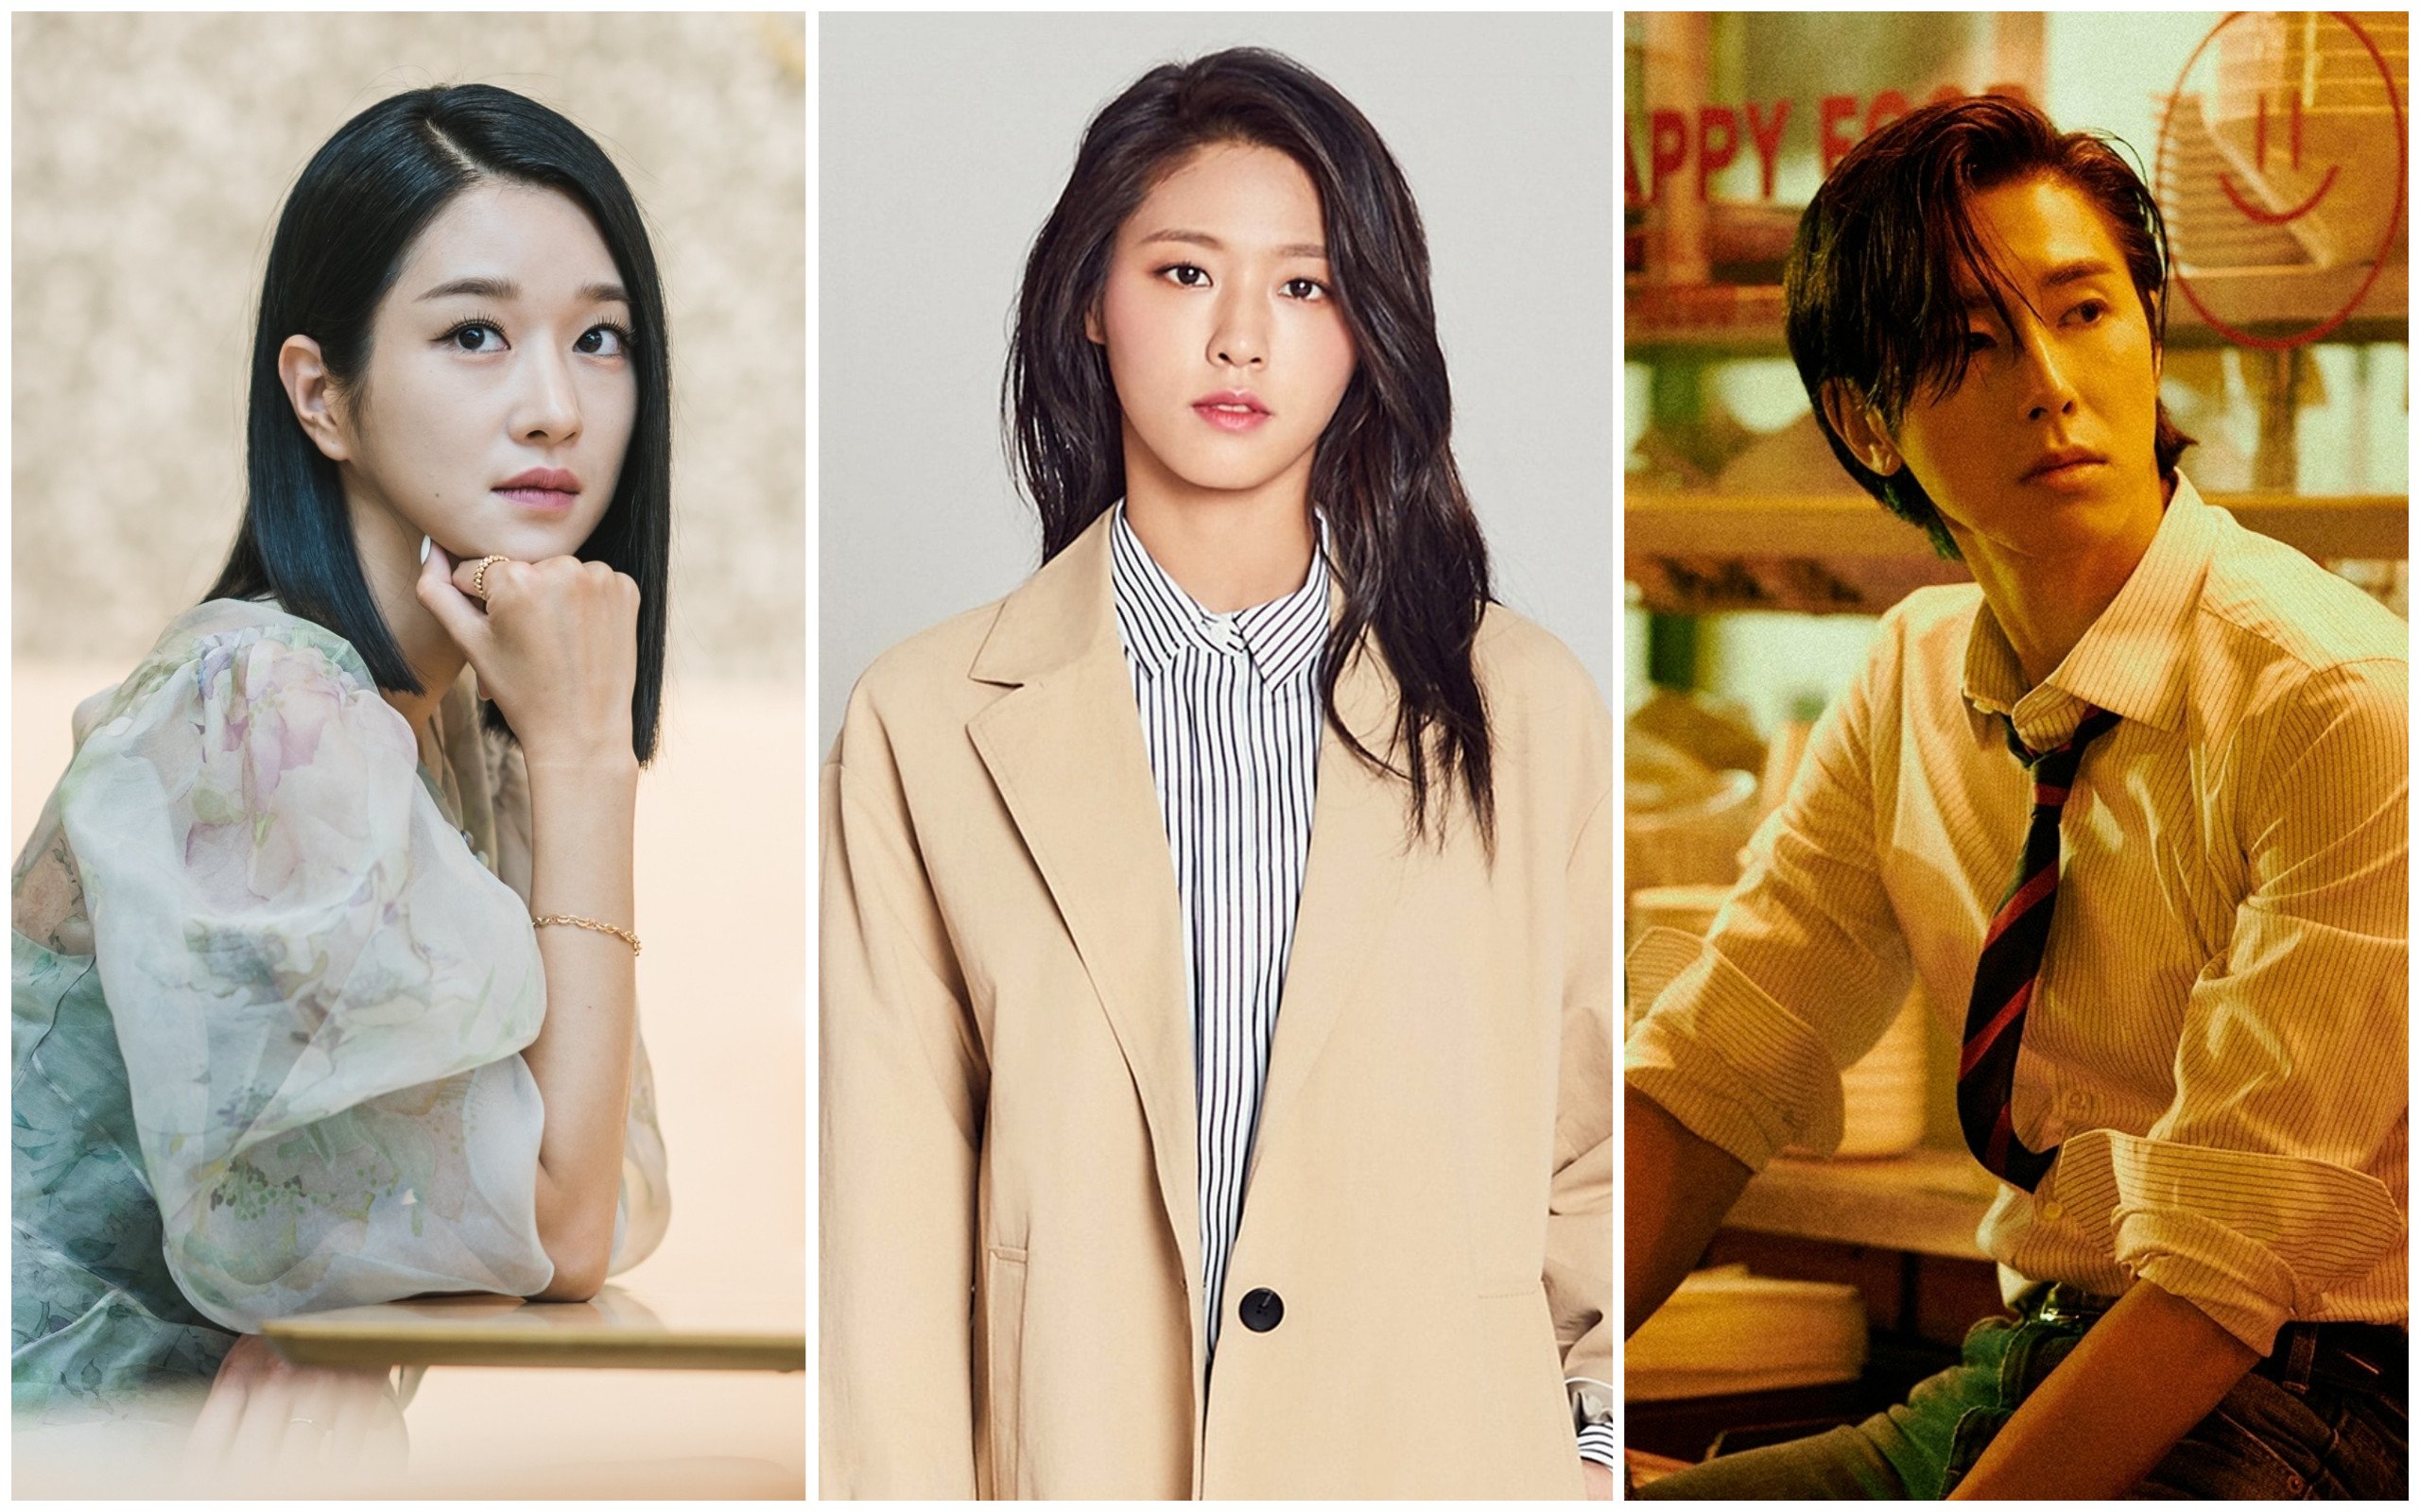 Seo Ye-ji, AOA’s Seolhyun and TVXQ’s Yunho were all dropped from projects following scandals. Photos: Netflix, FNC Entertainment, SM Entertainment